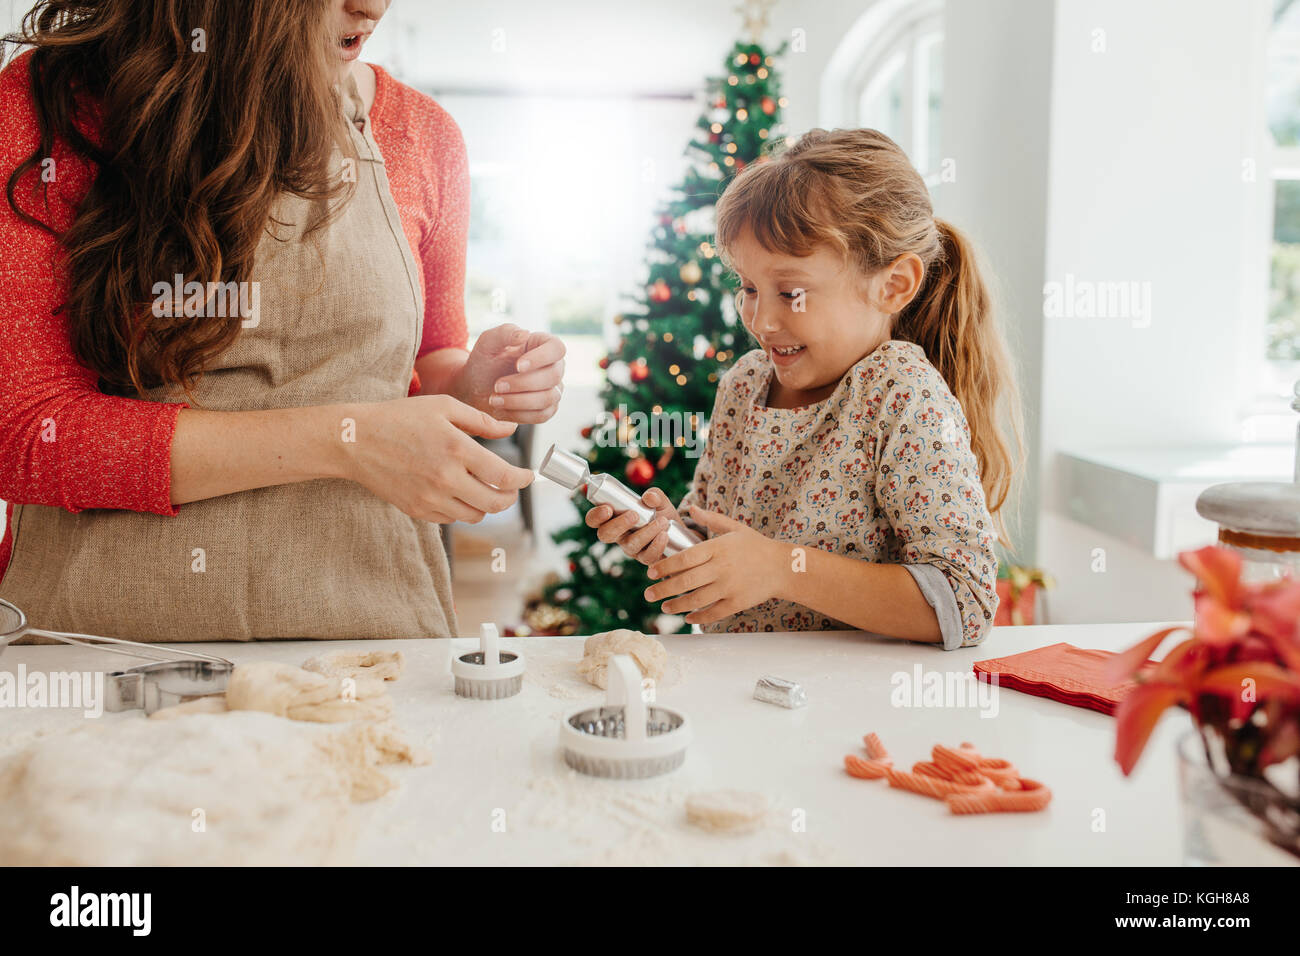 Mother and daughter pulling a Christmas cracker. Woman making Christmas cookies using dough moulds and cutters. Stock Photo